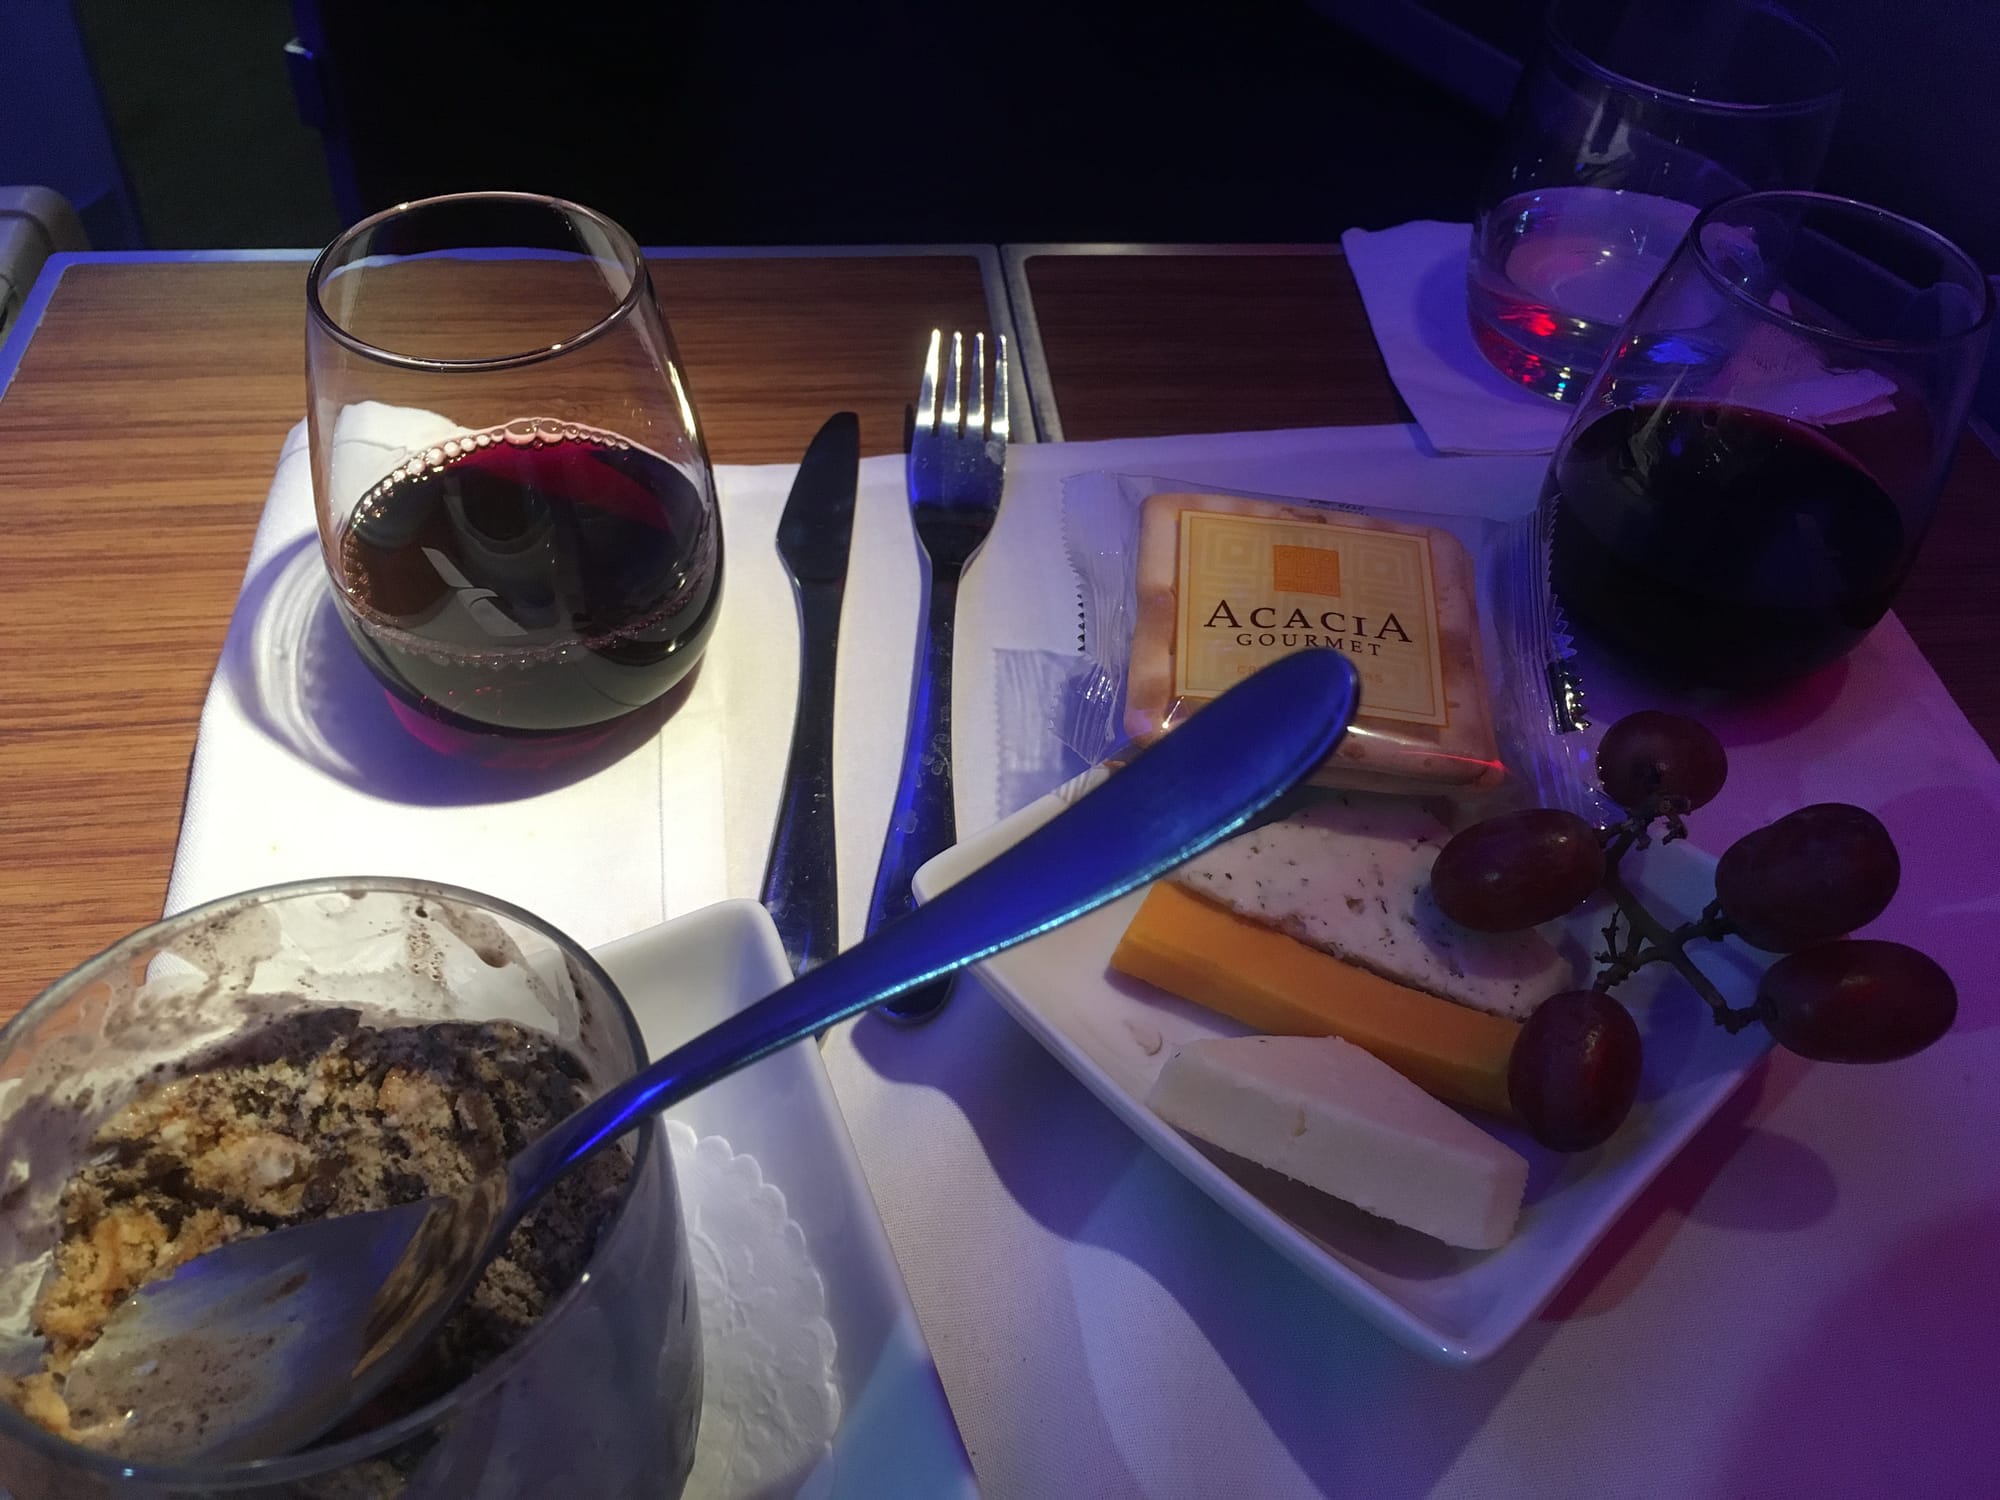 American Airlines Business Class Food